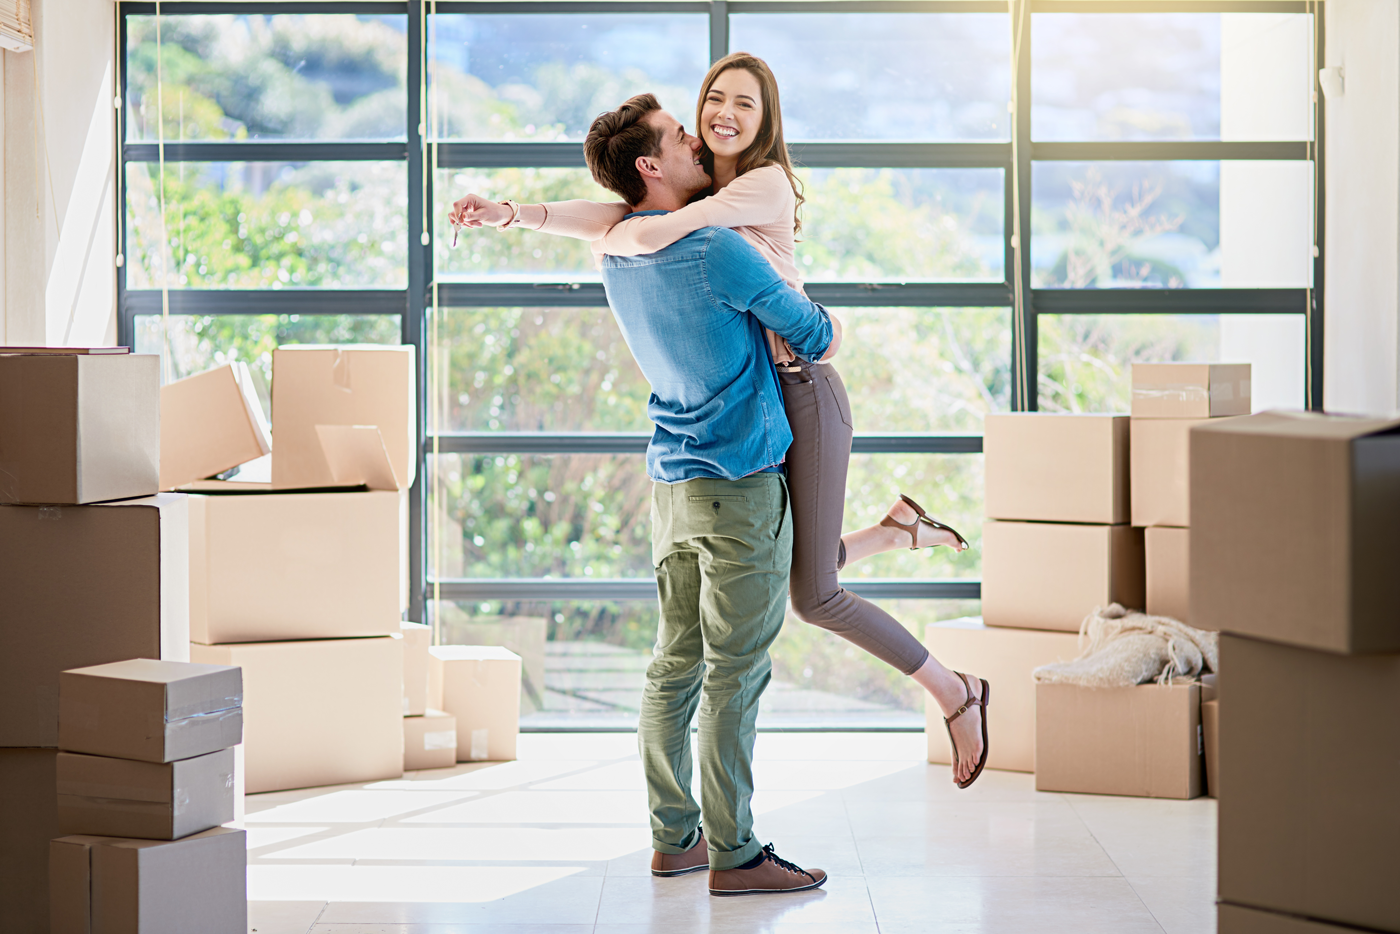 Moving couple: a young man holding his happy wife in his arms, surrounded by moving boxes.